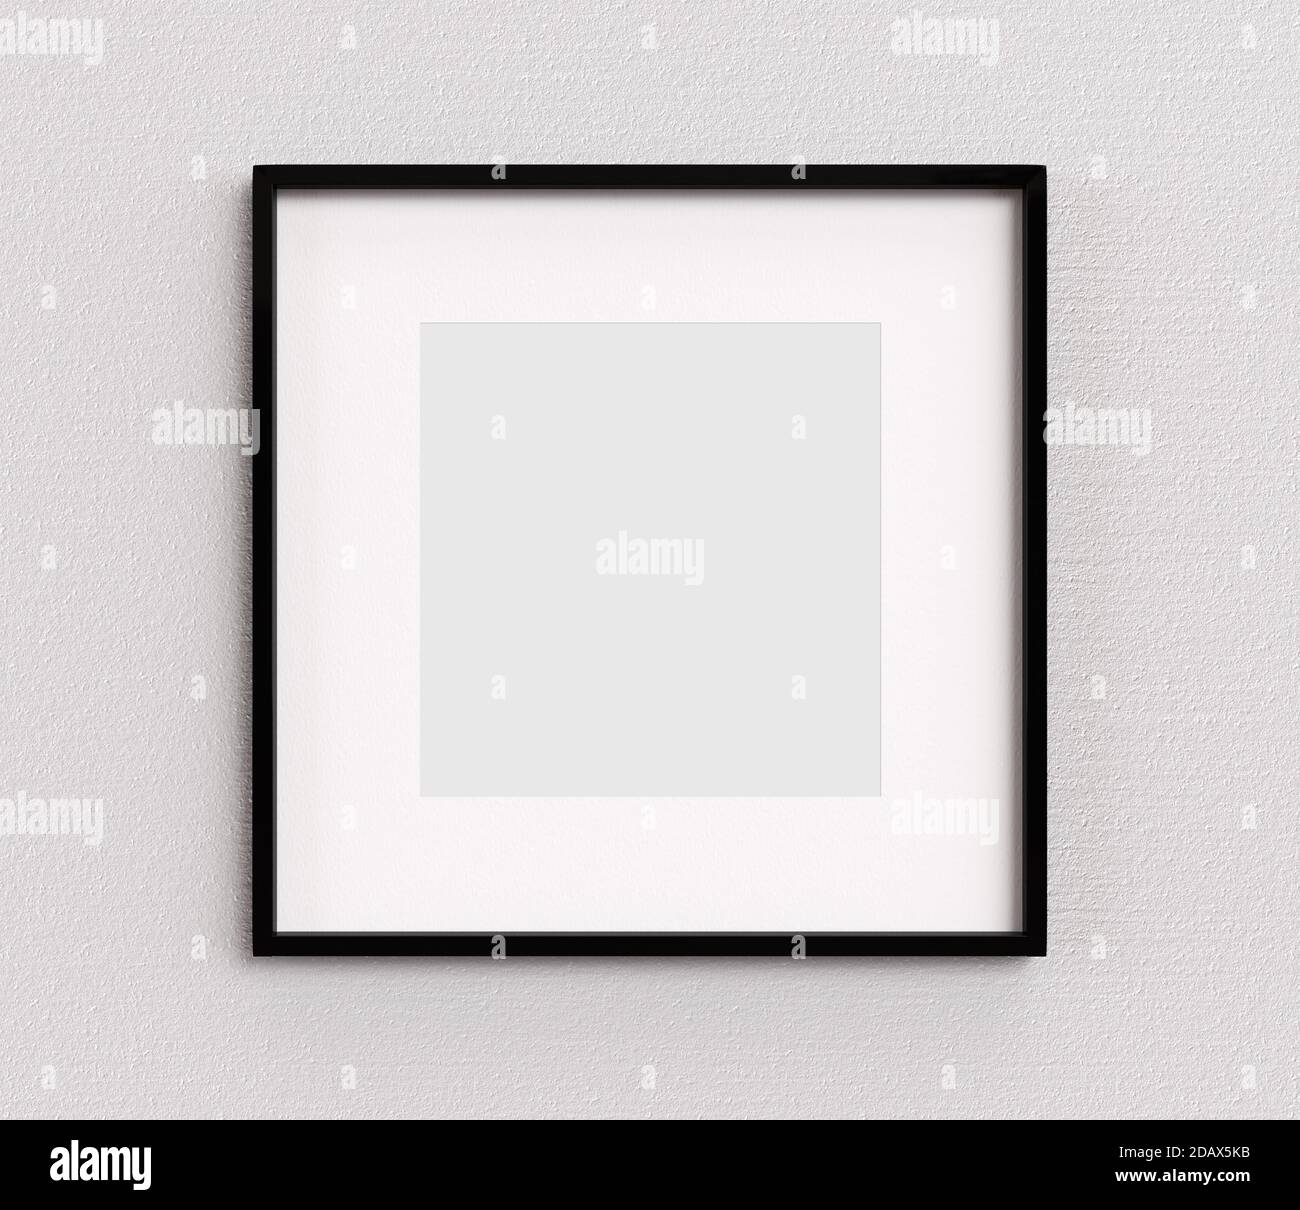 Empty picture frame with square shape on a white wall with black frame. Blank Mockup for images and photos. Stock Photo